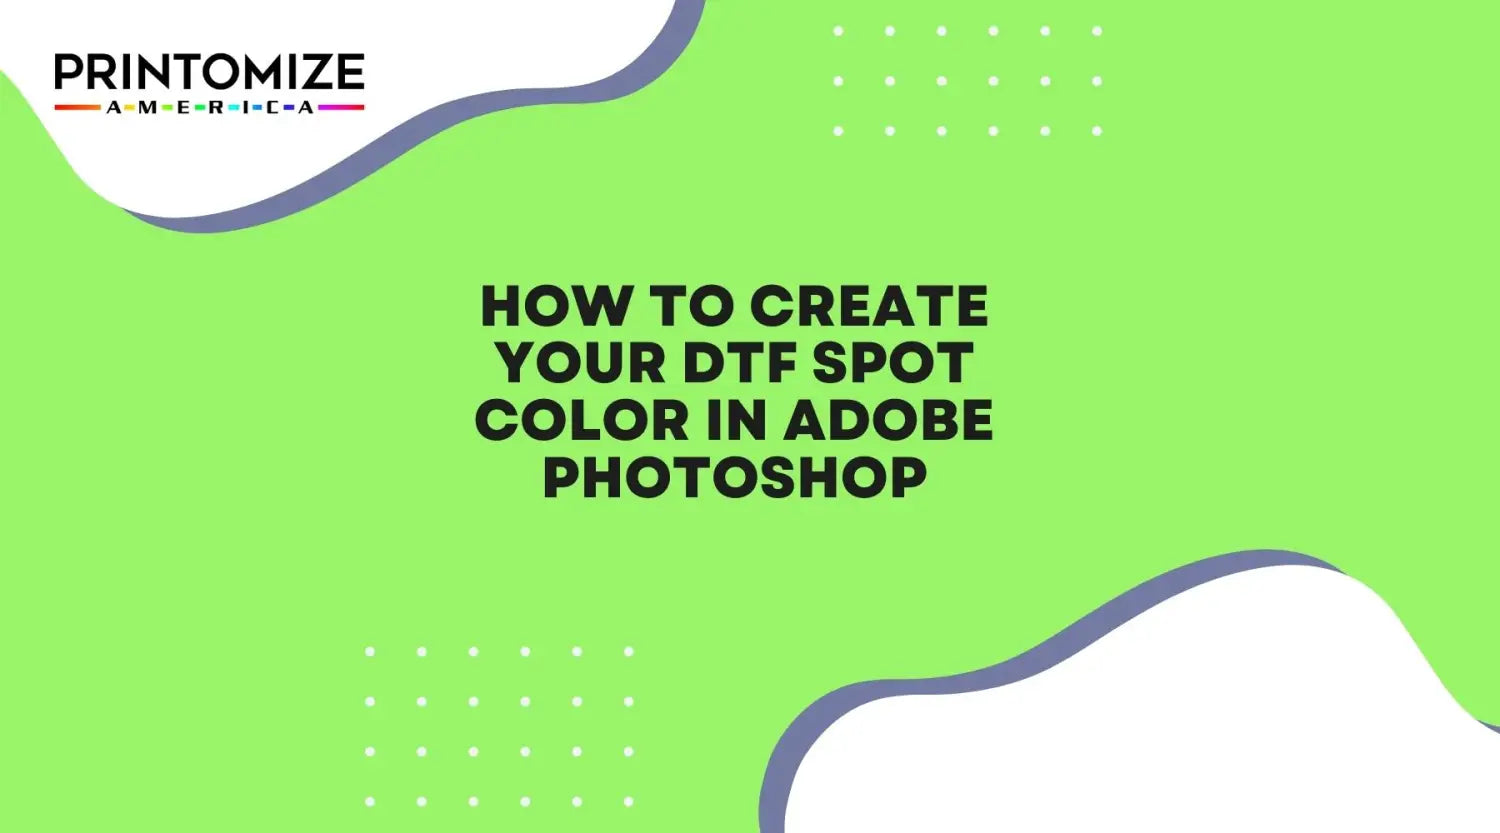 How to create your DTF spot color in Adobe Photoshop